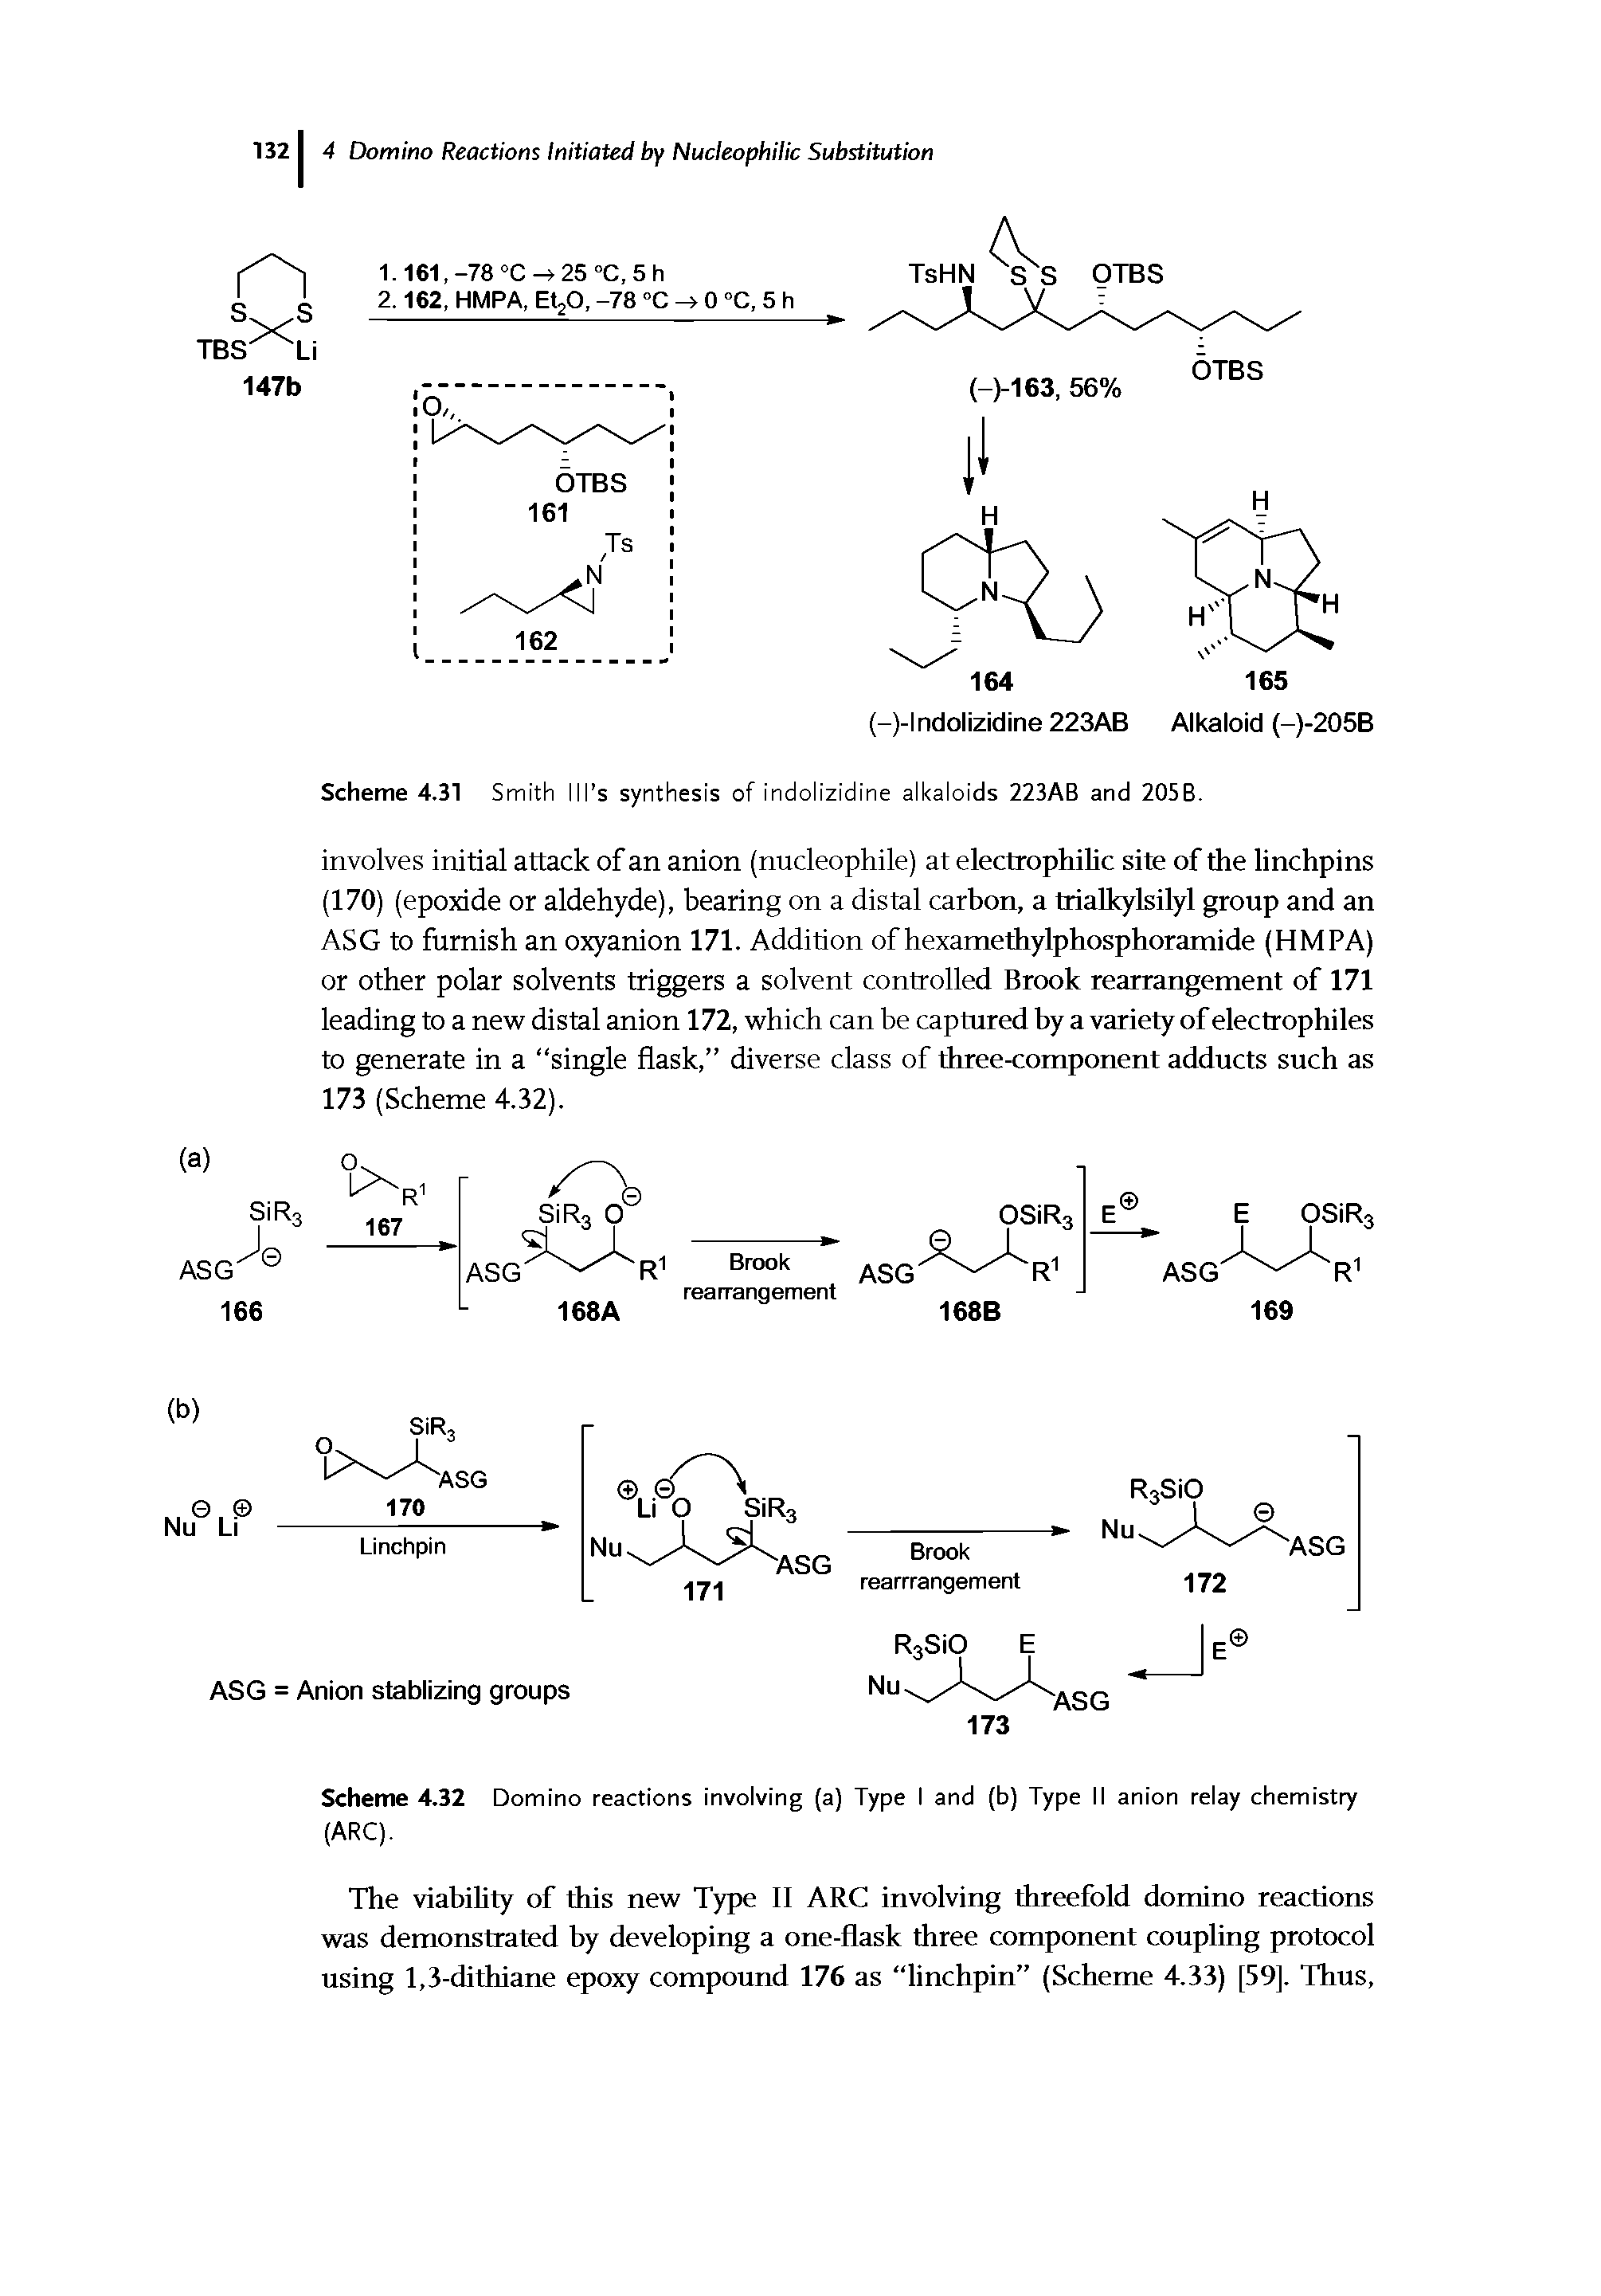 Scheme 4.32 Domino reactions involving (a) Type I and (b) Type II anion relay chemistry (ARC).